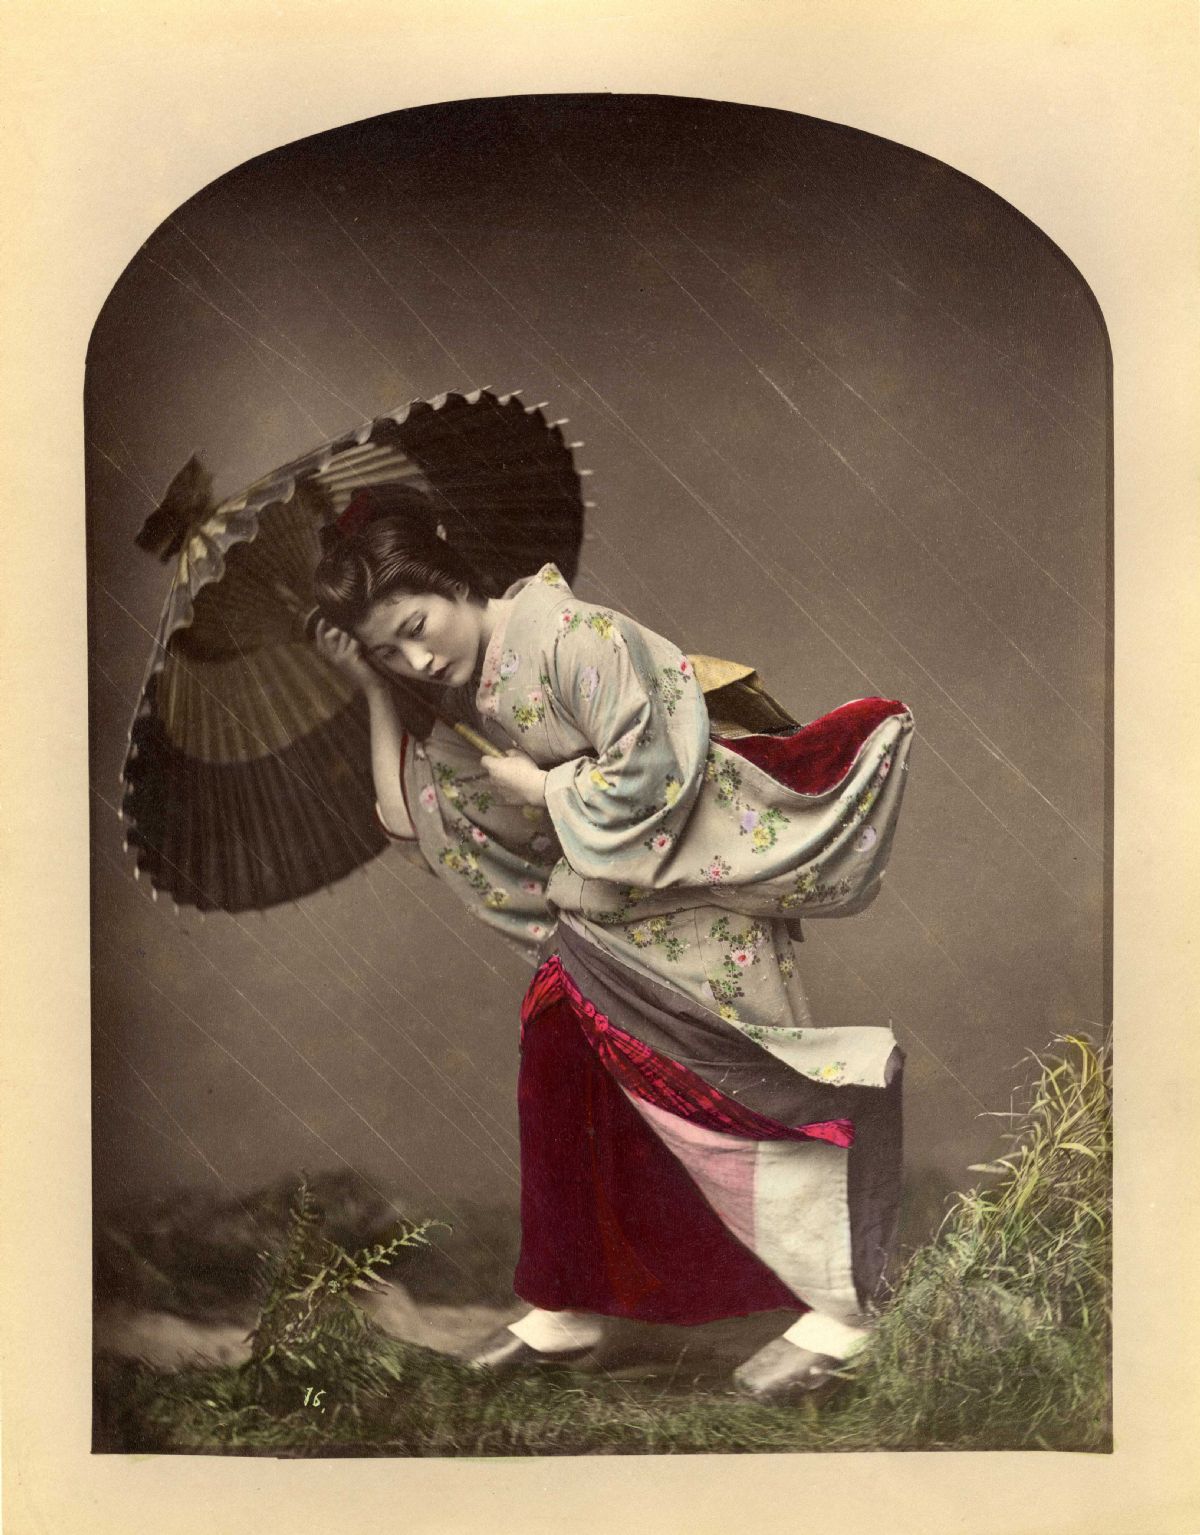 East Meets West: Hand-Tinted Vintage Photographs from Meiji Japan, 1880-1900